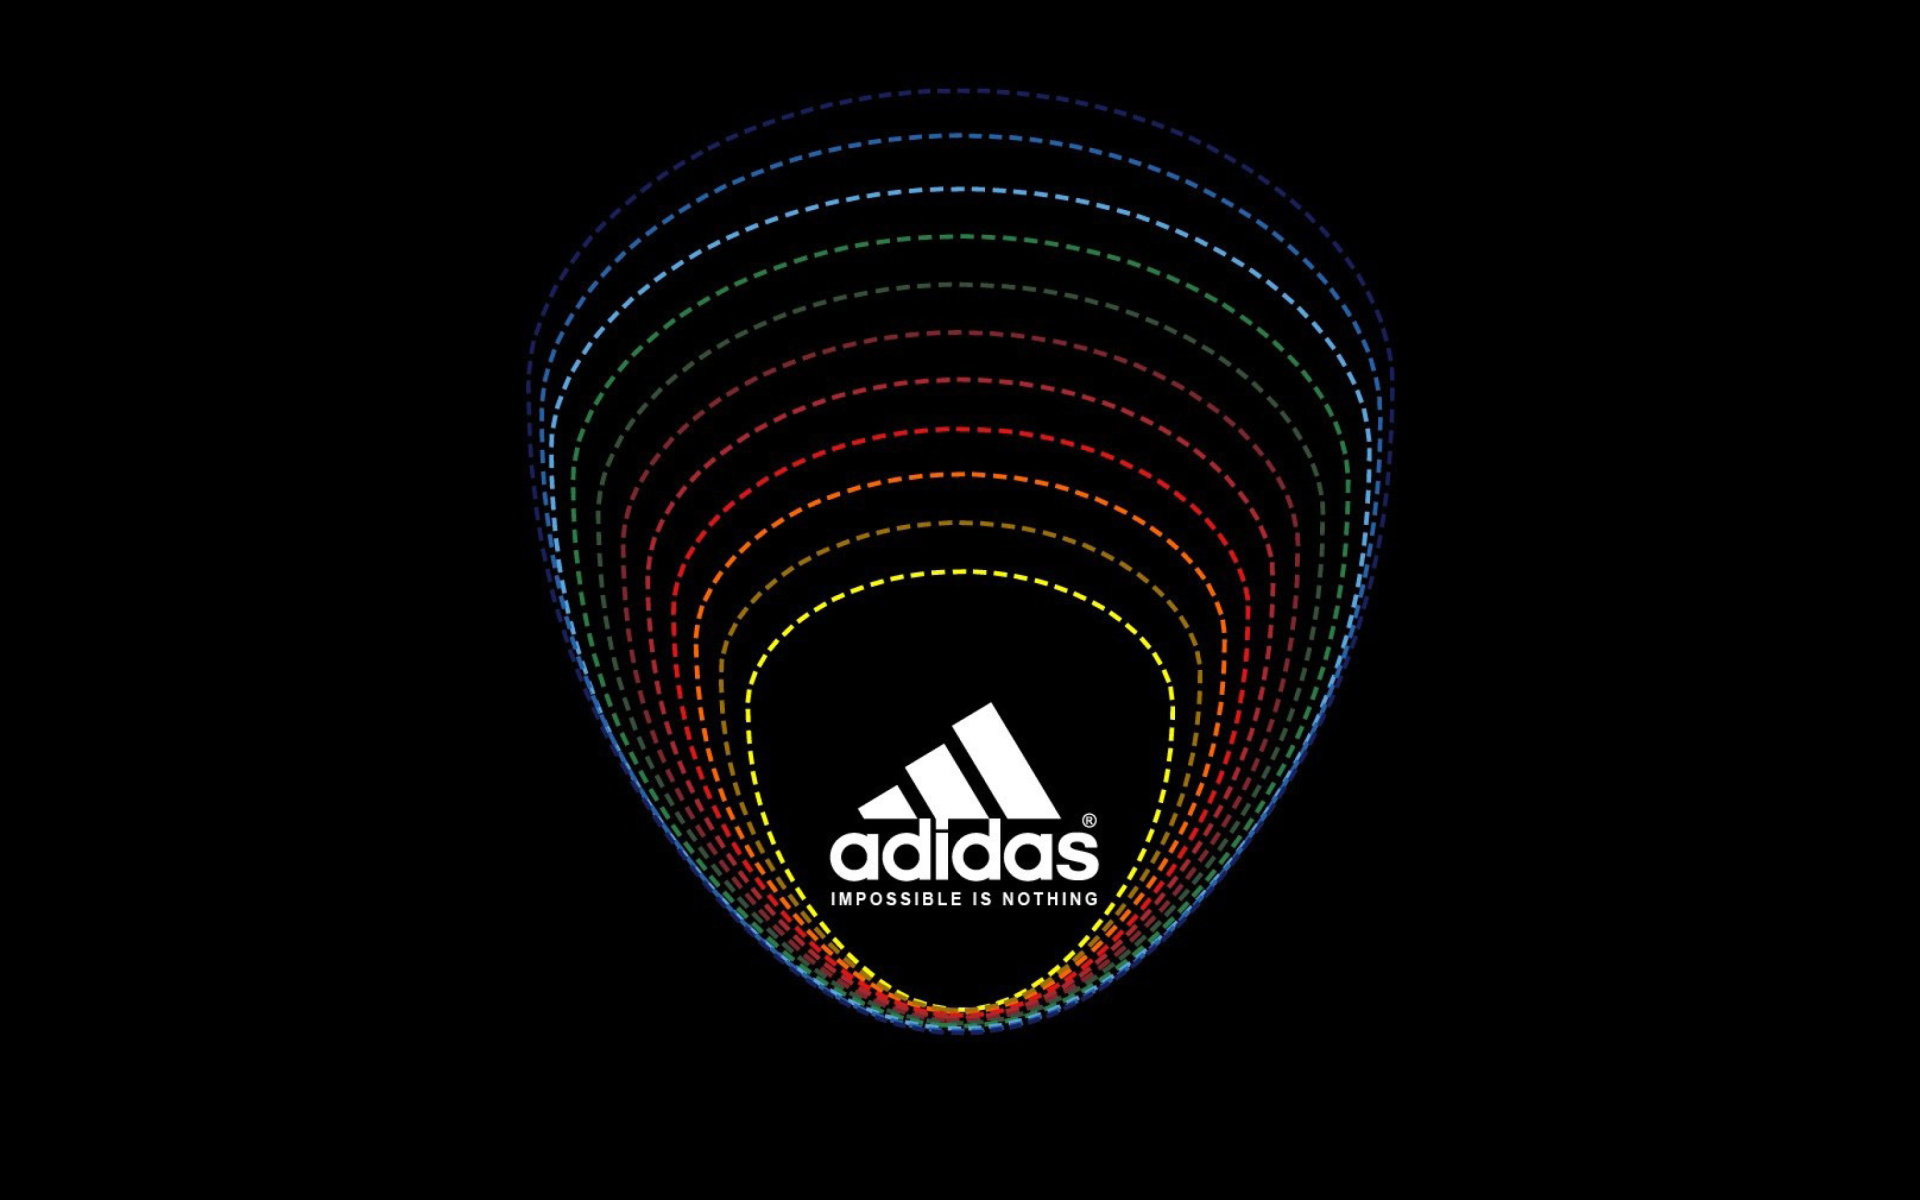 Adidas Tagline, Impossible is Nothing screenshot #1 1920x1200